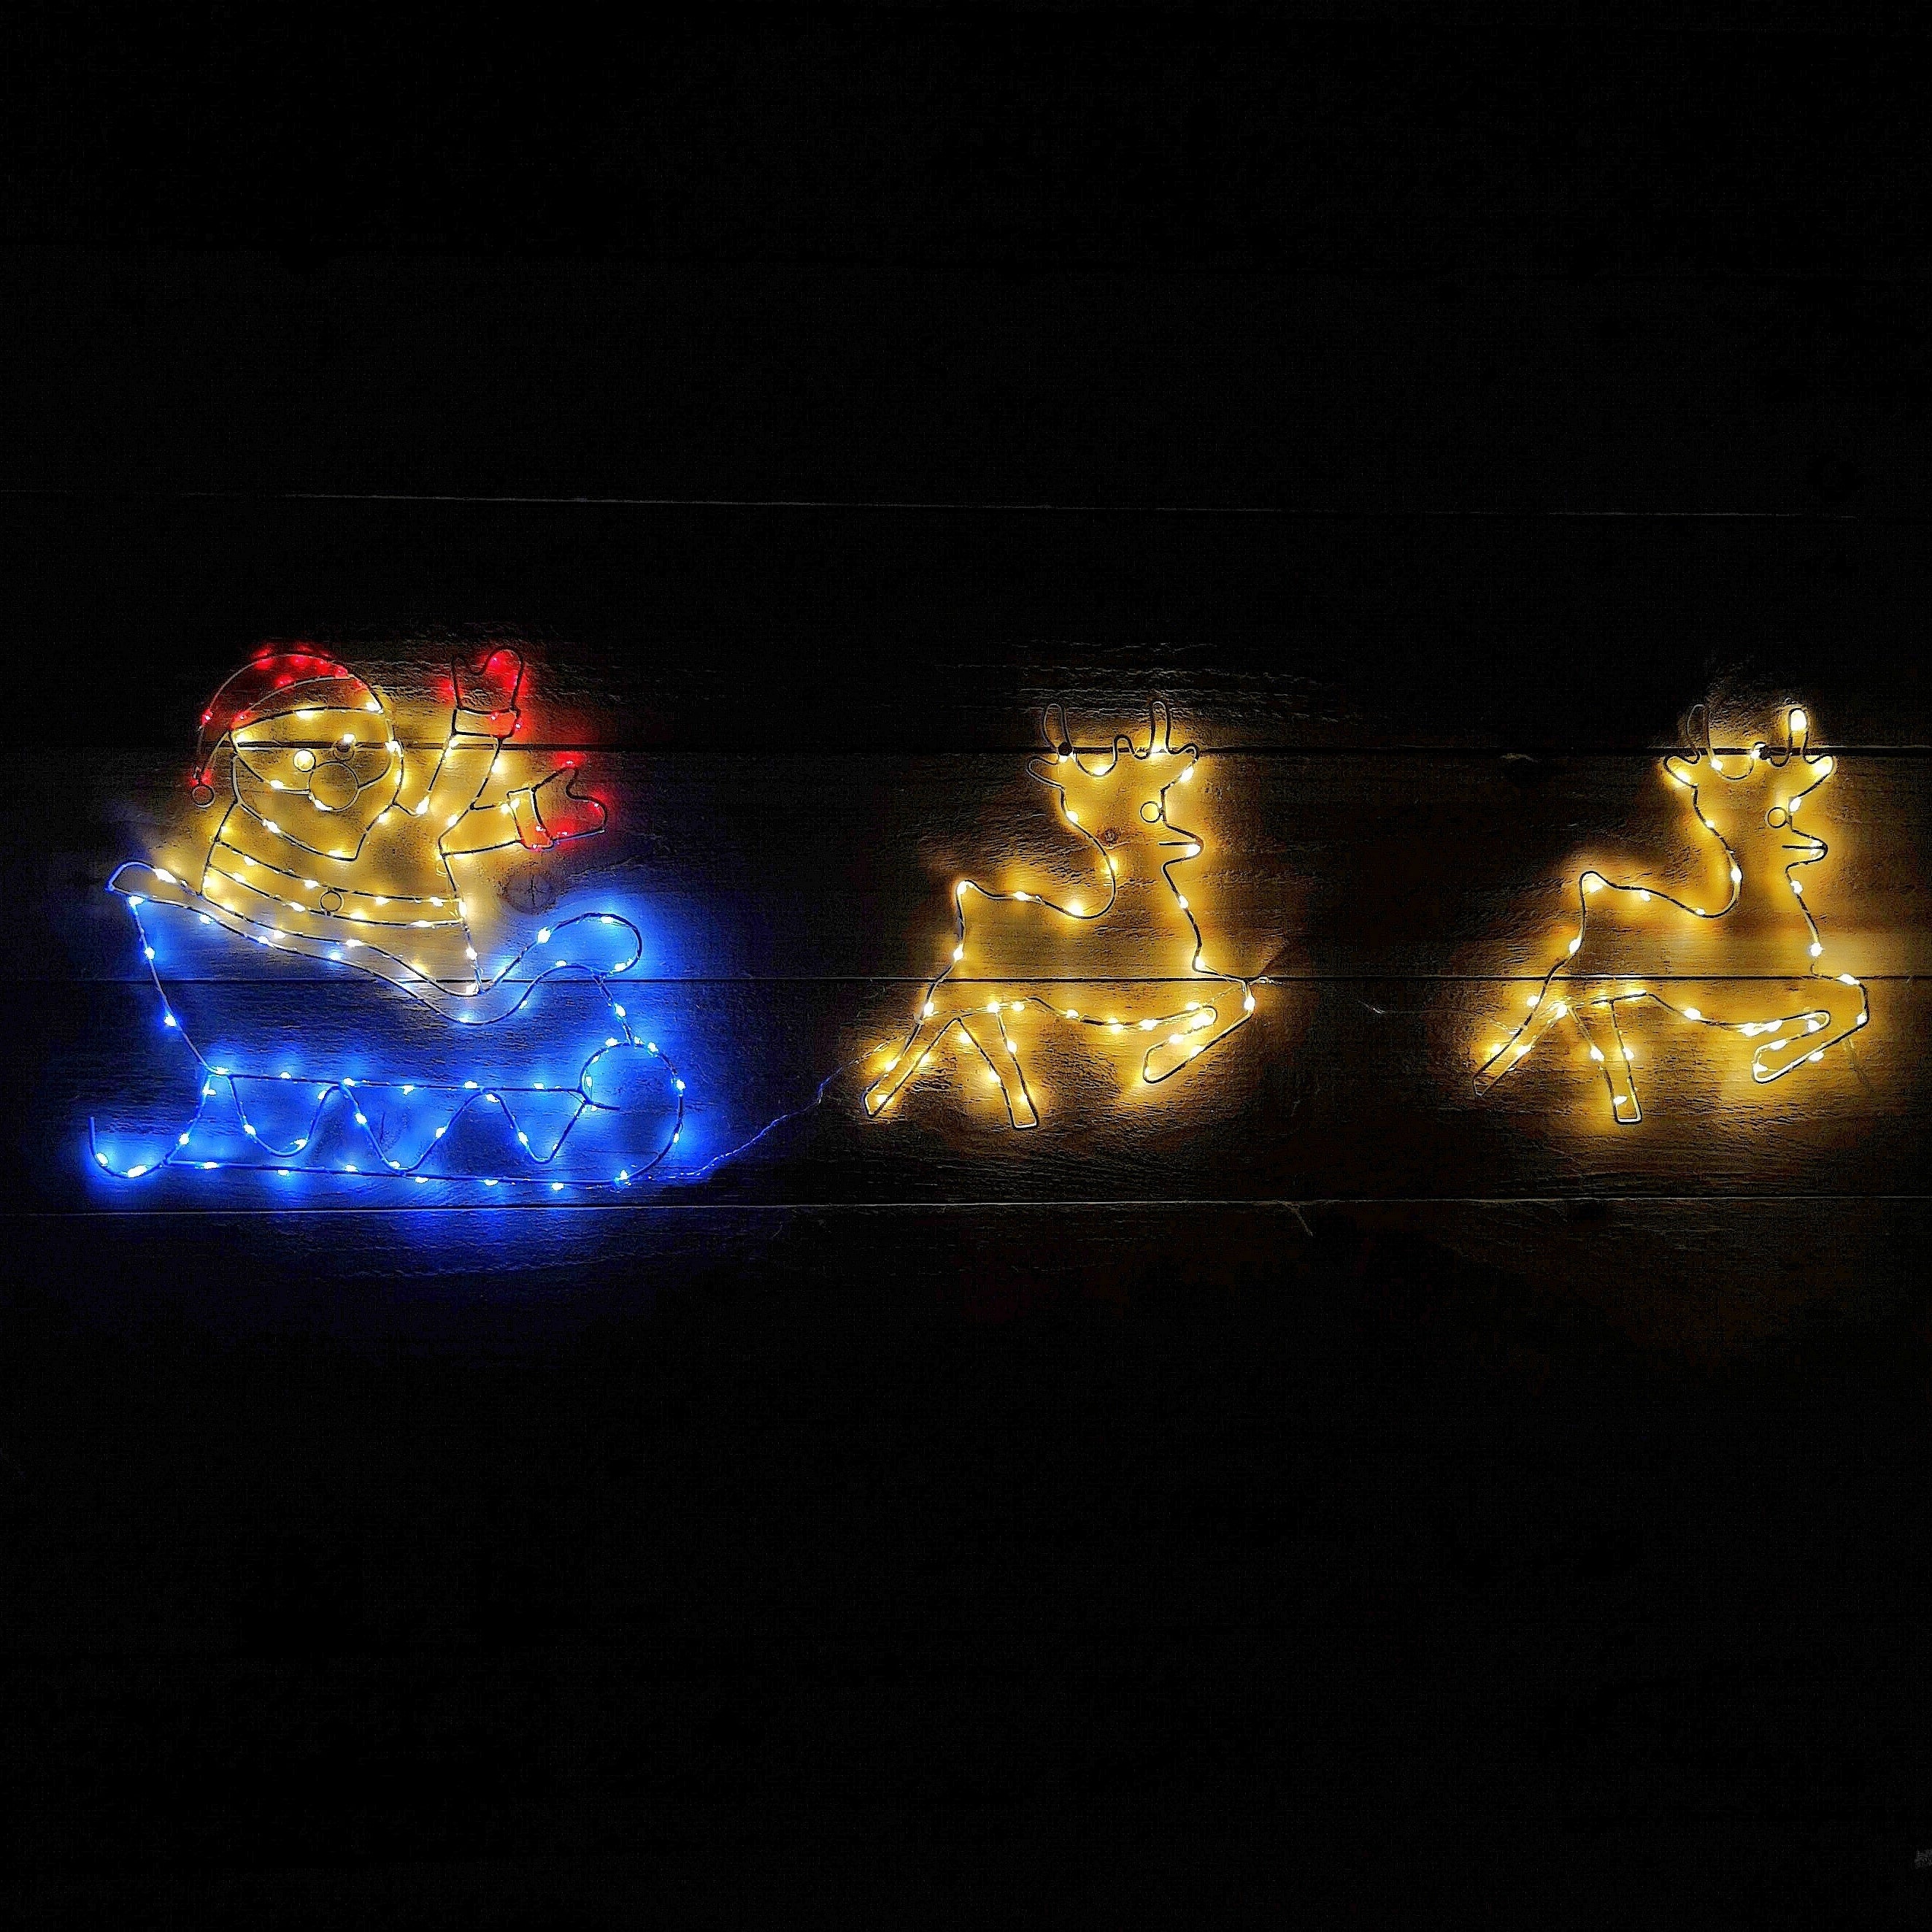 Image of 1.2m Flashing Chasing Christmas Santa Sleigh and Reindeer with 190 Red White and Blue Pin Wire LED